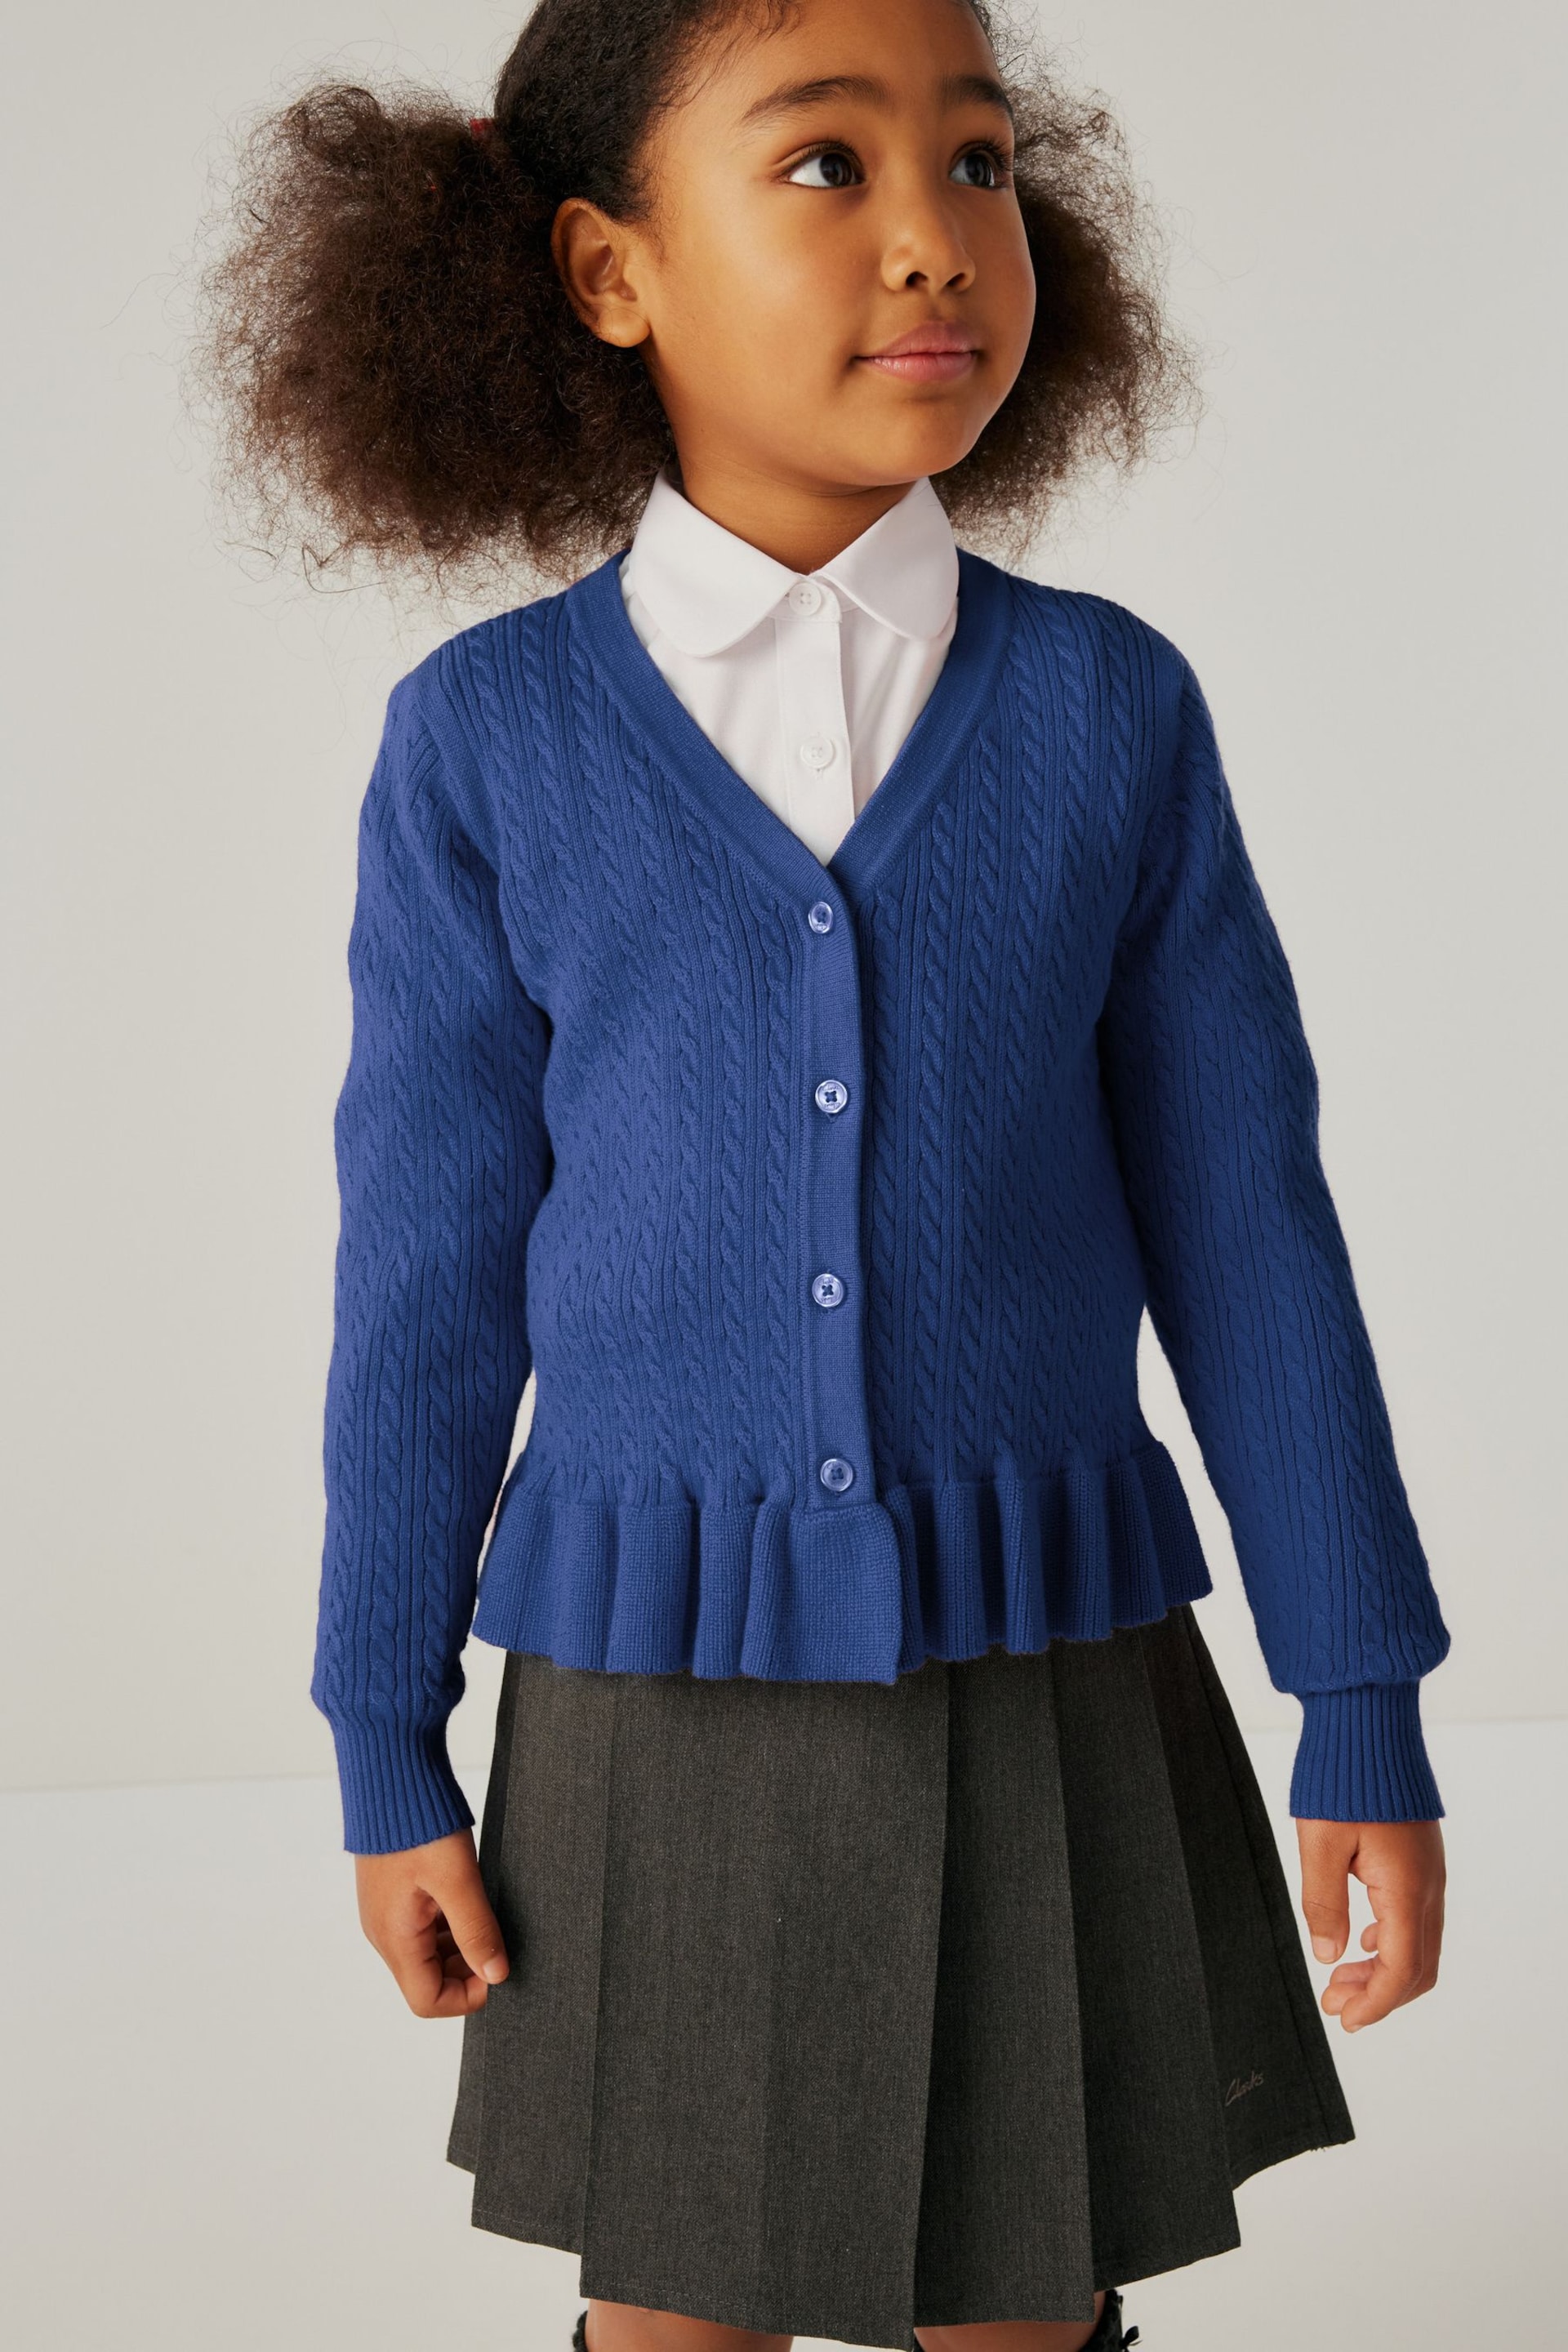 Clarks Blue School Cable Knit Cardigan - Image 1 of 5